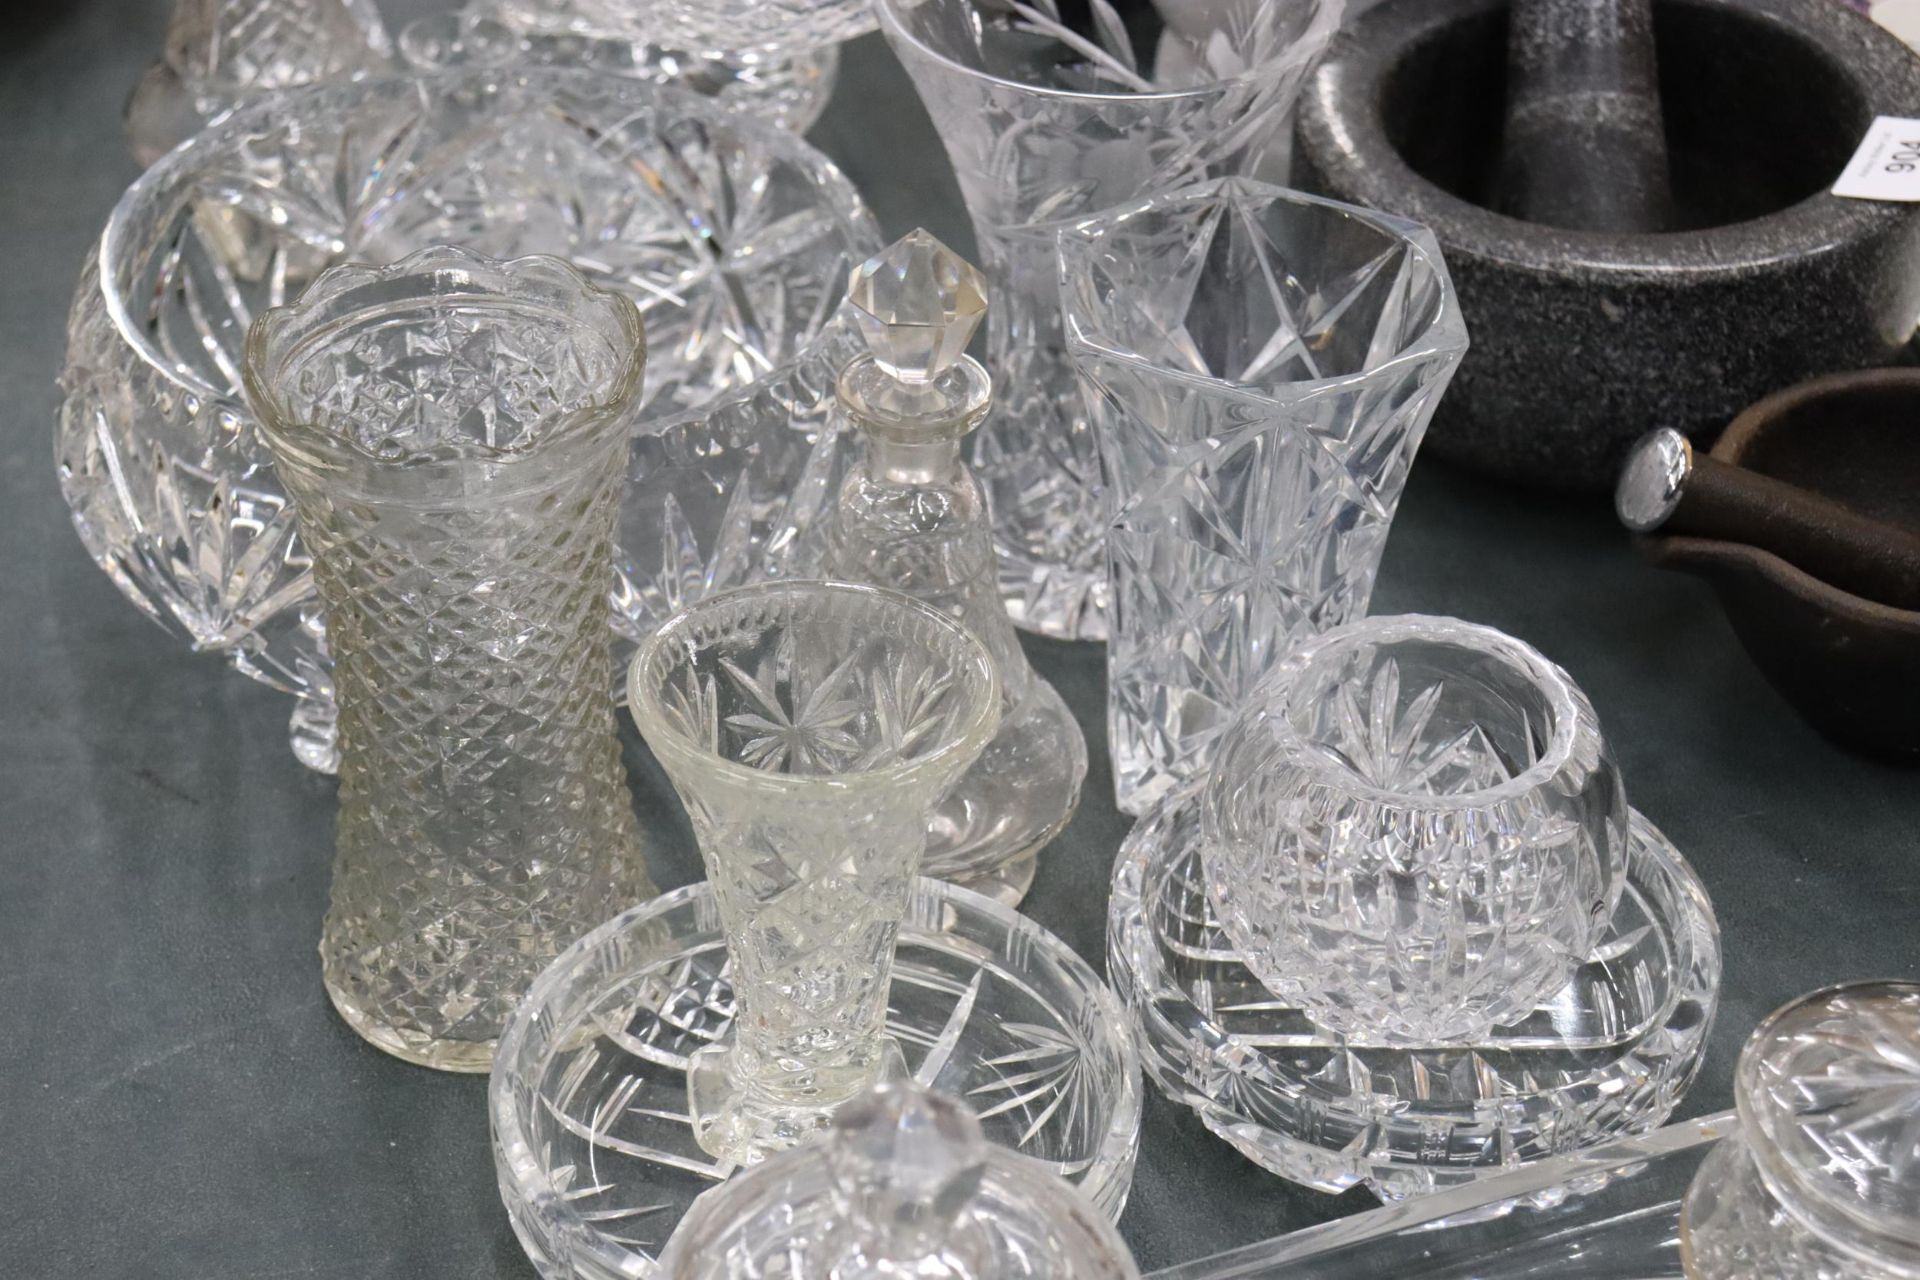 A LARGE QUANTITY OF GLASSWARE TO INCLUDE CUT GLASS VASES, BOWLS, A DRESSING TABLE SET WITH TRAY, OIL - Image 10 of 10